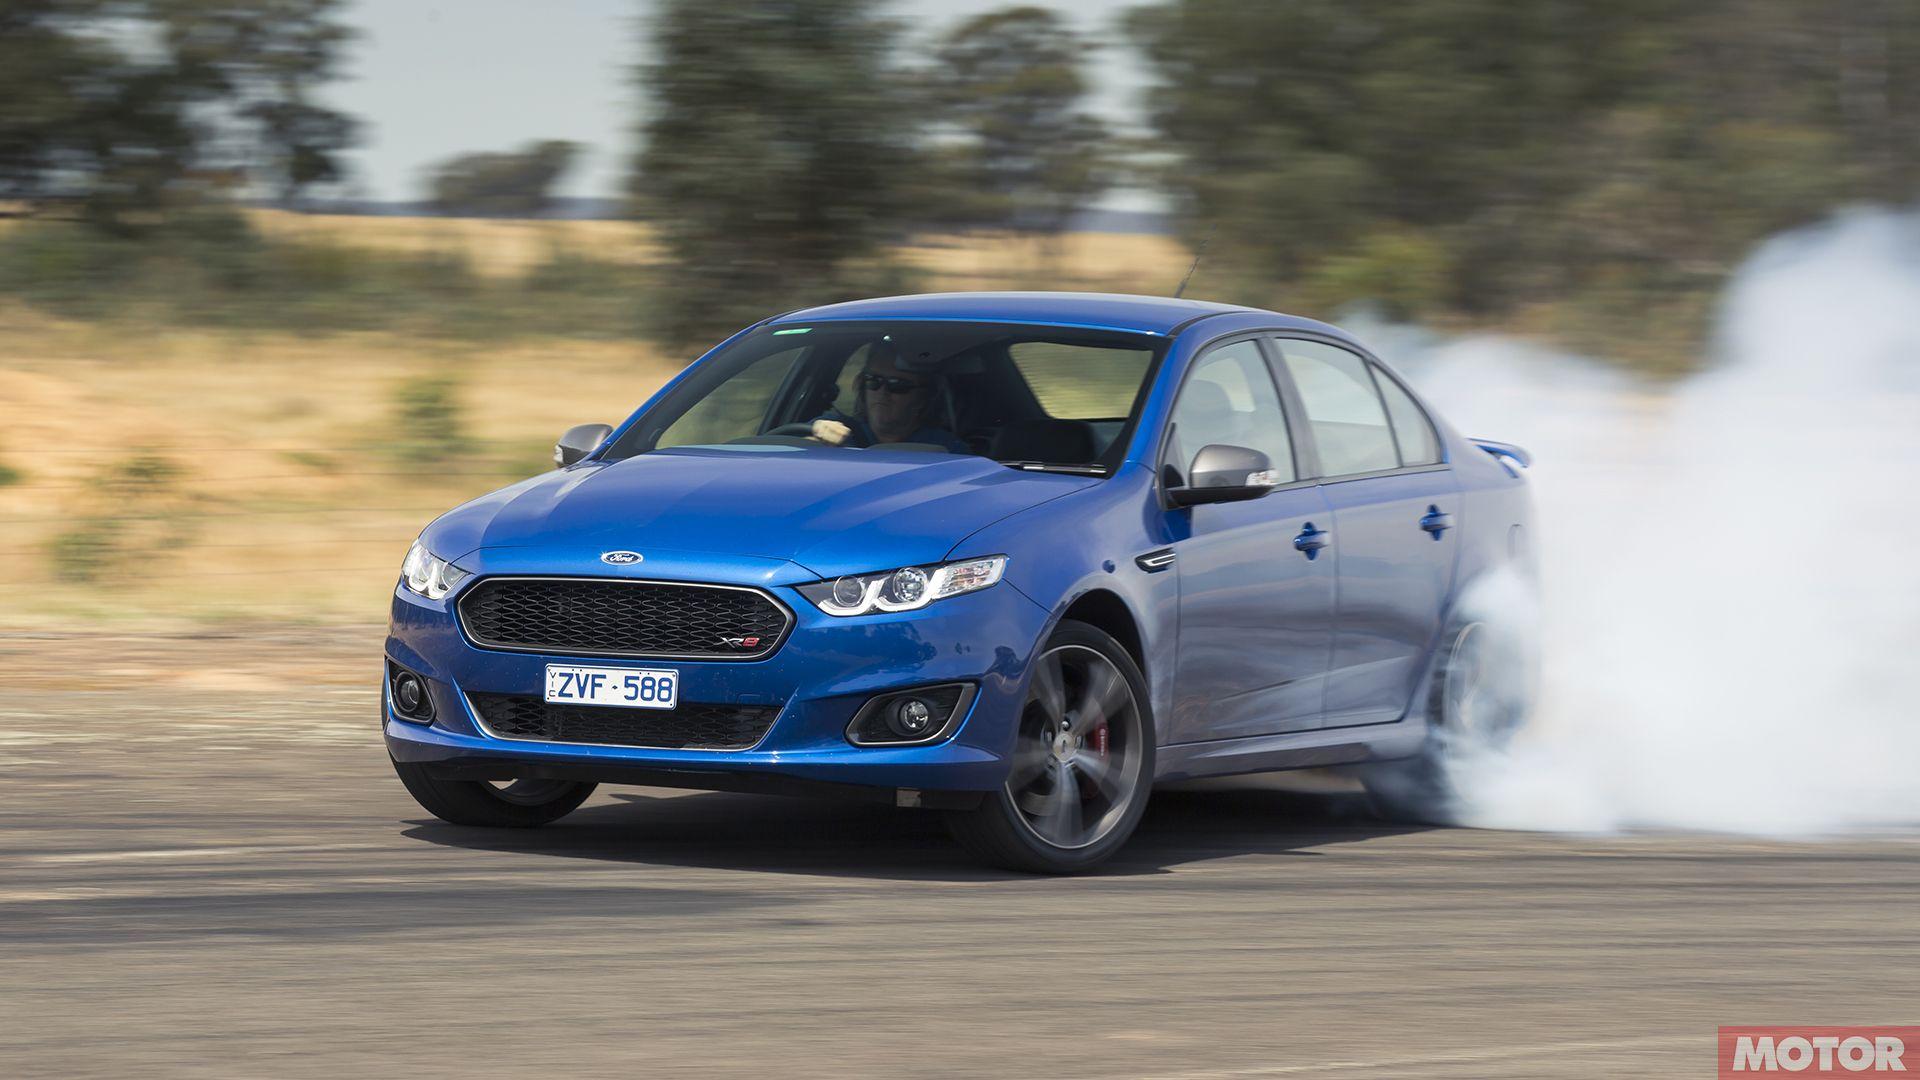 Weekly Wallpaper: Ford Falcon XR8